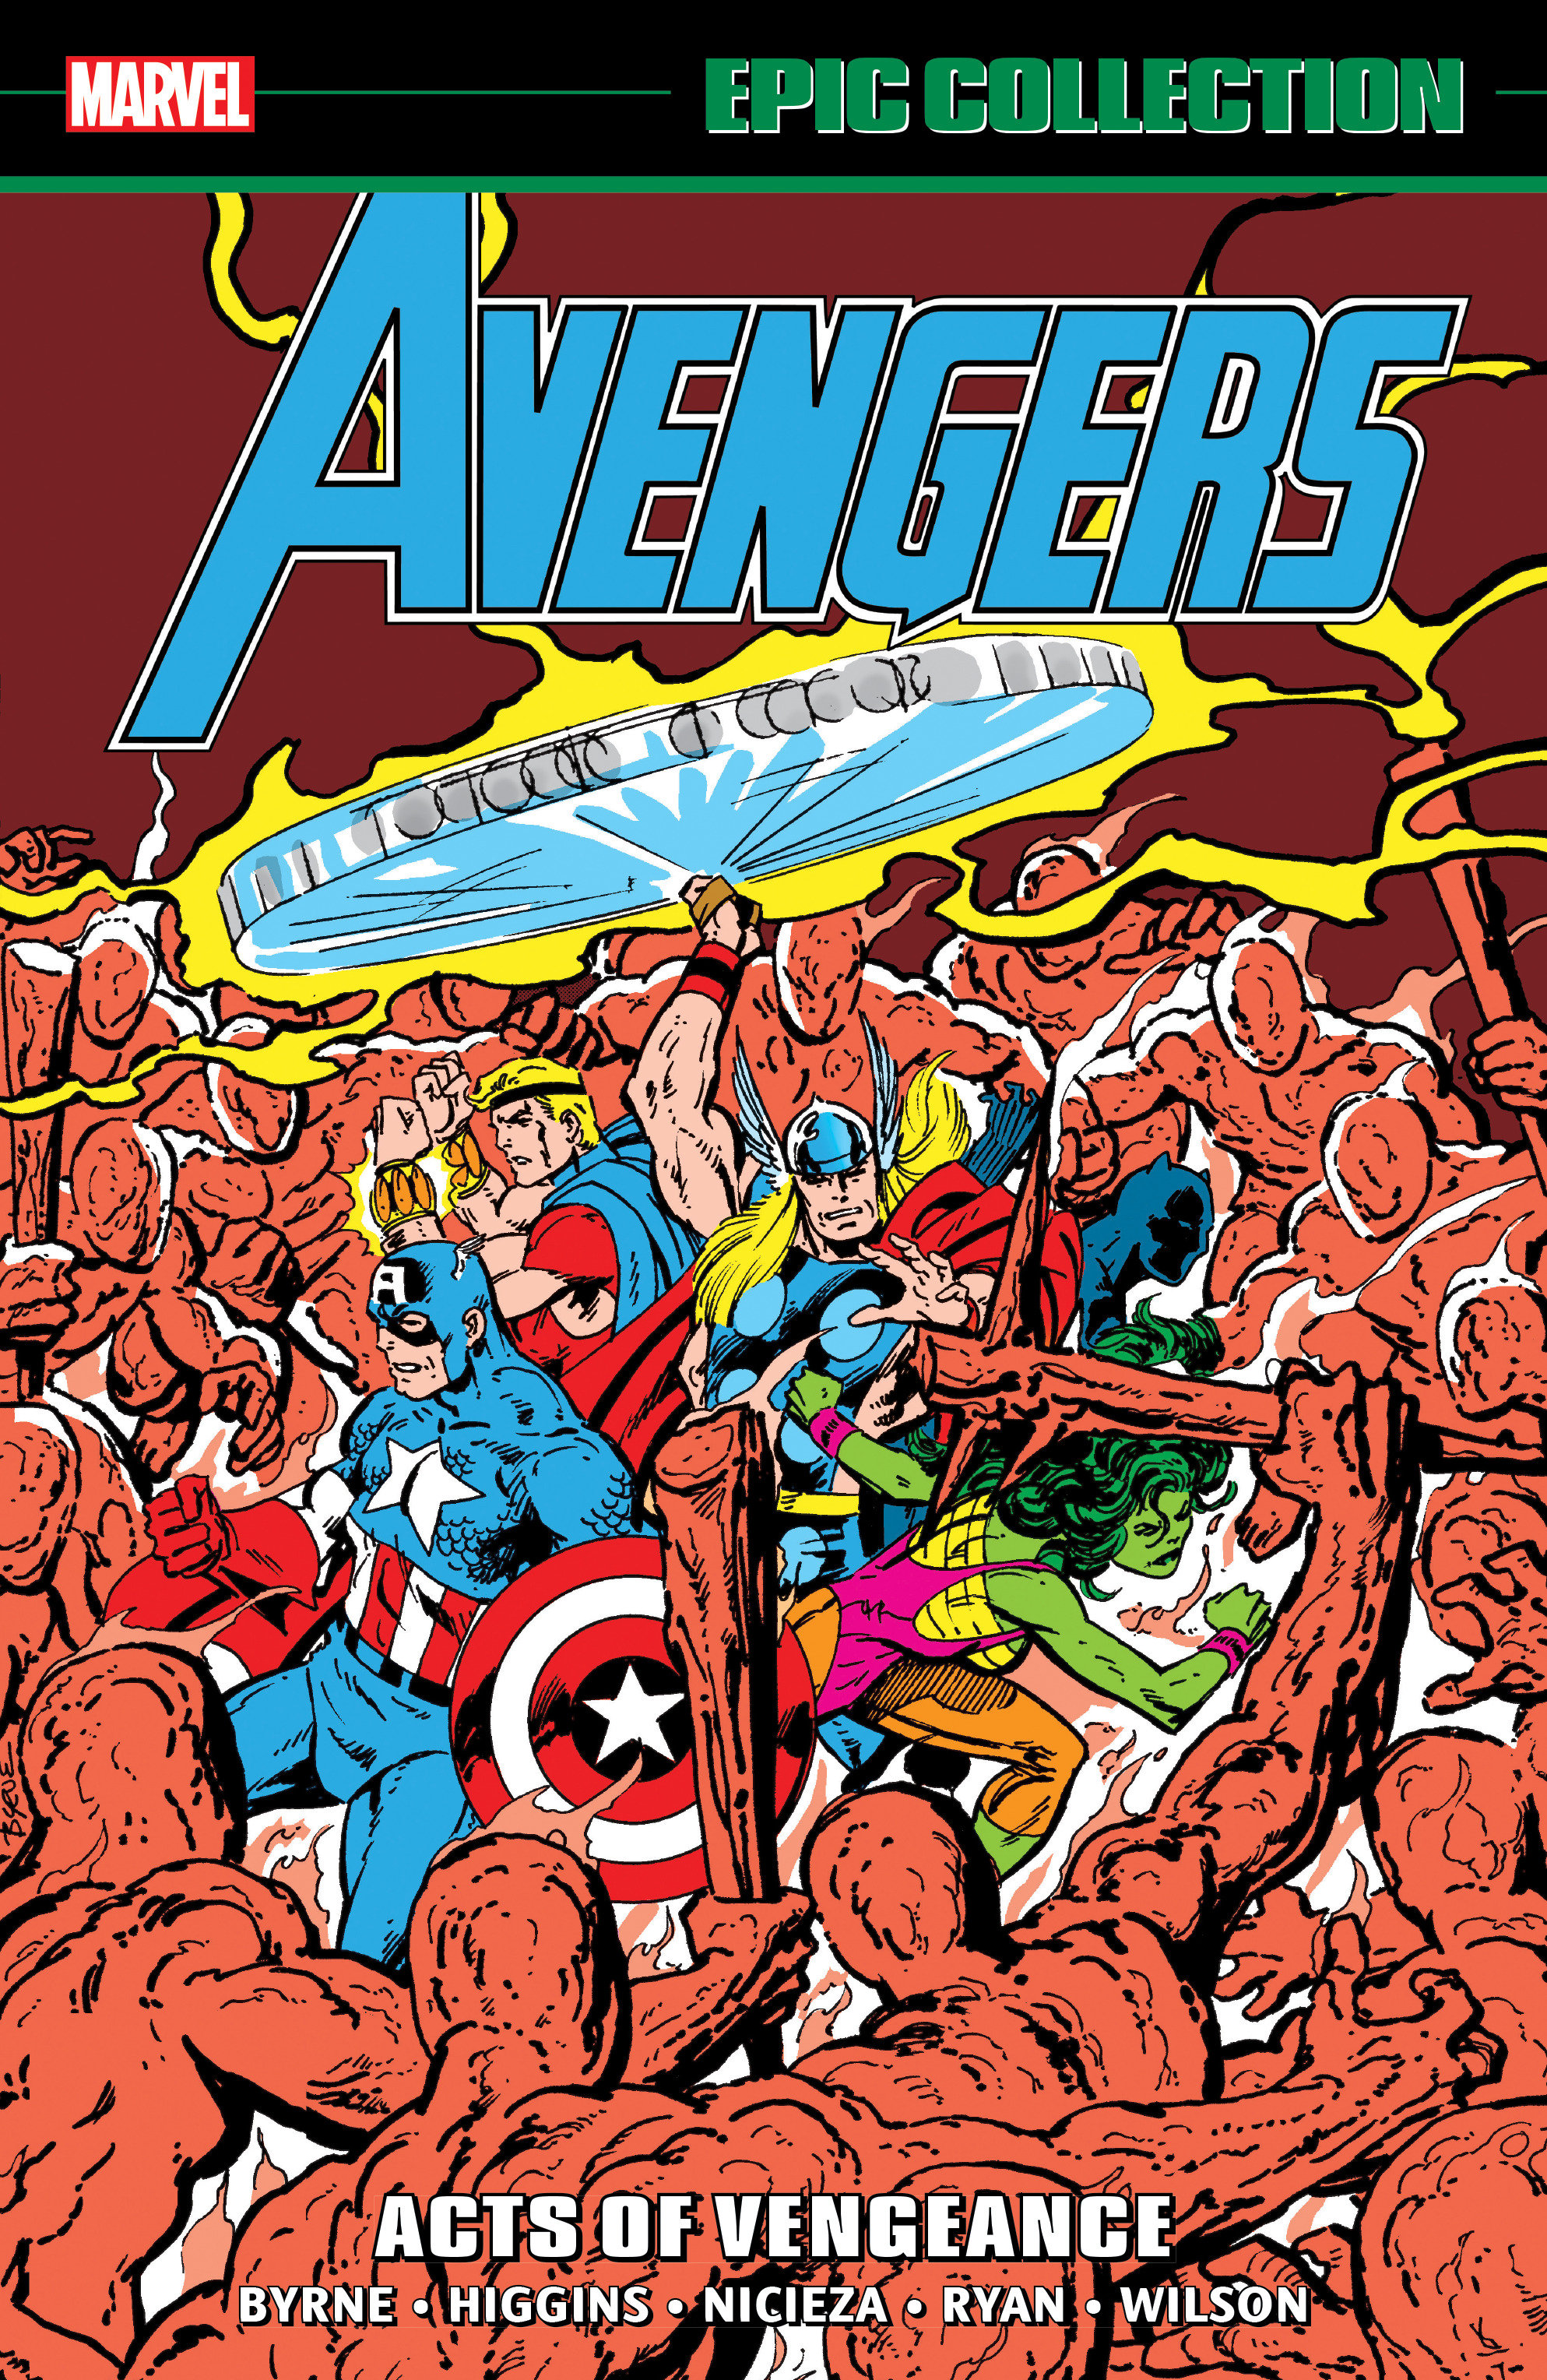 Avengers Epic Collection Graphic Novel Volume 19 Acts of Vengeance